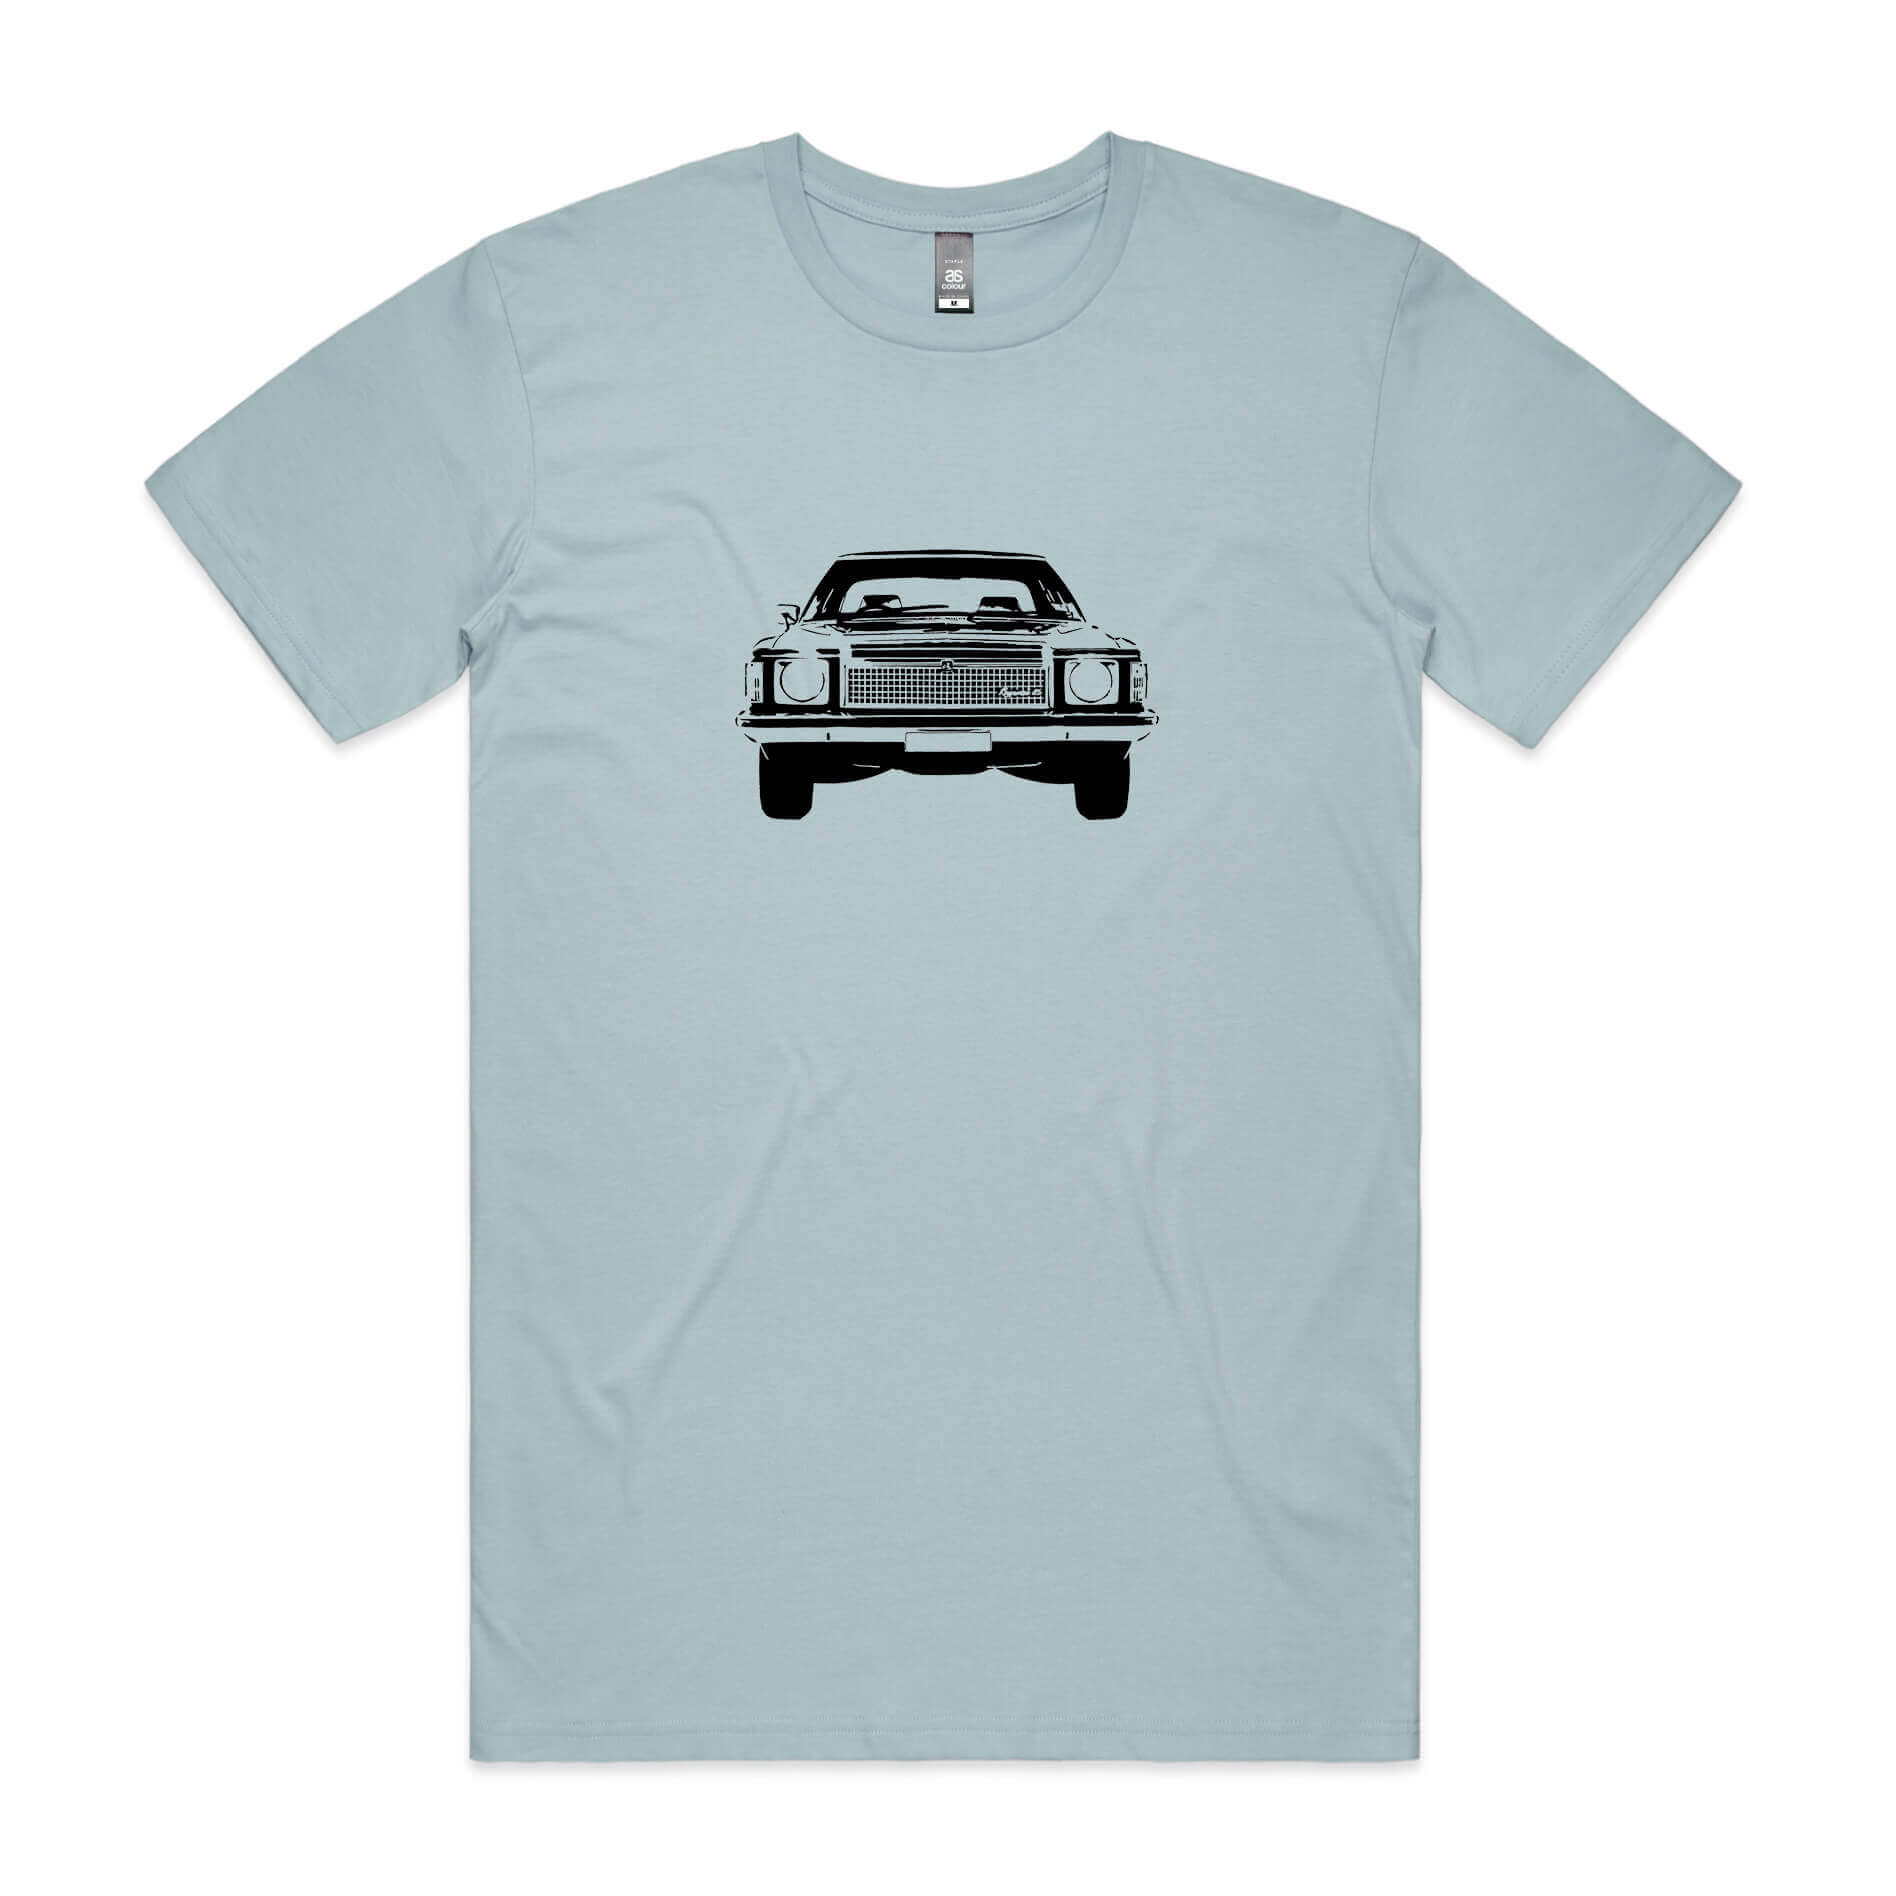 Holden HZ Kingswood t-shirt in light blue with black car silhouette graphic